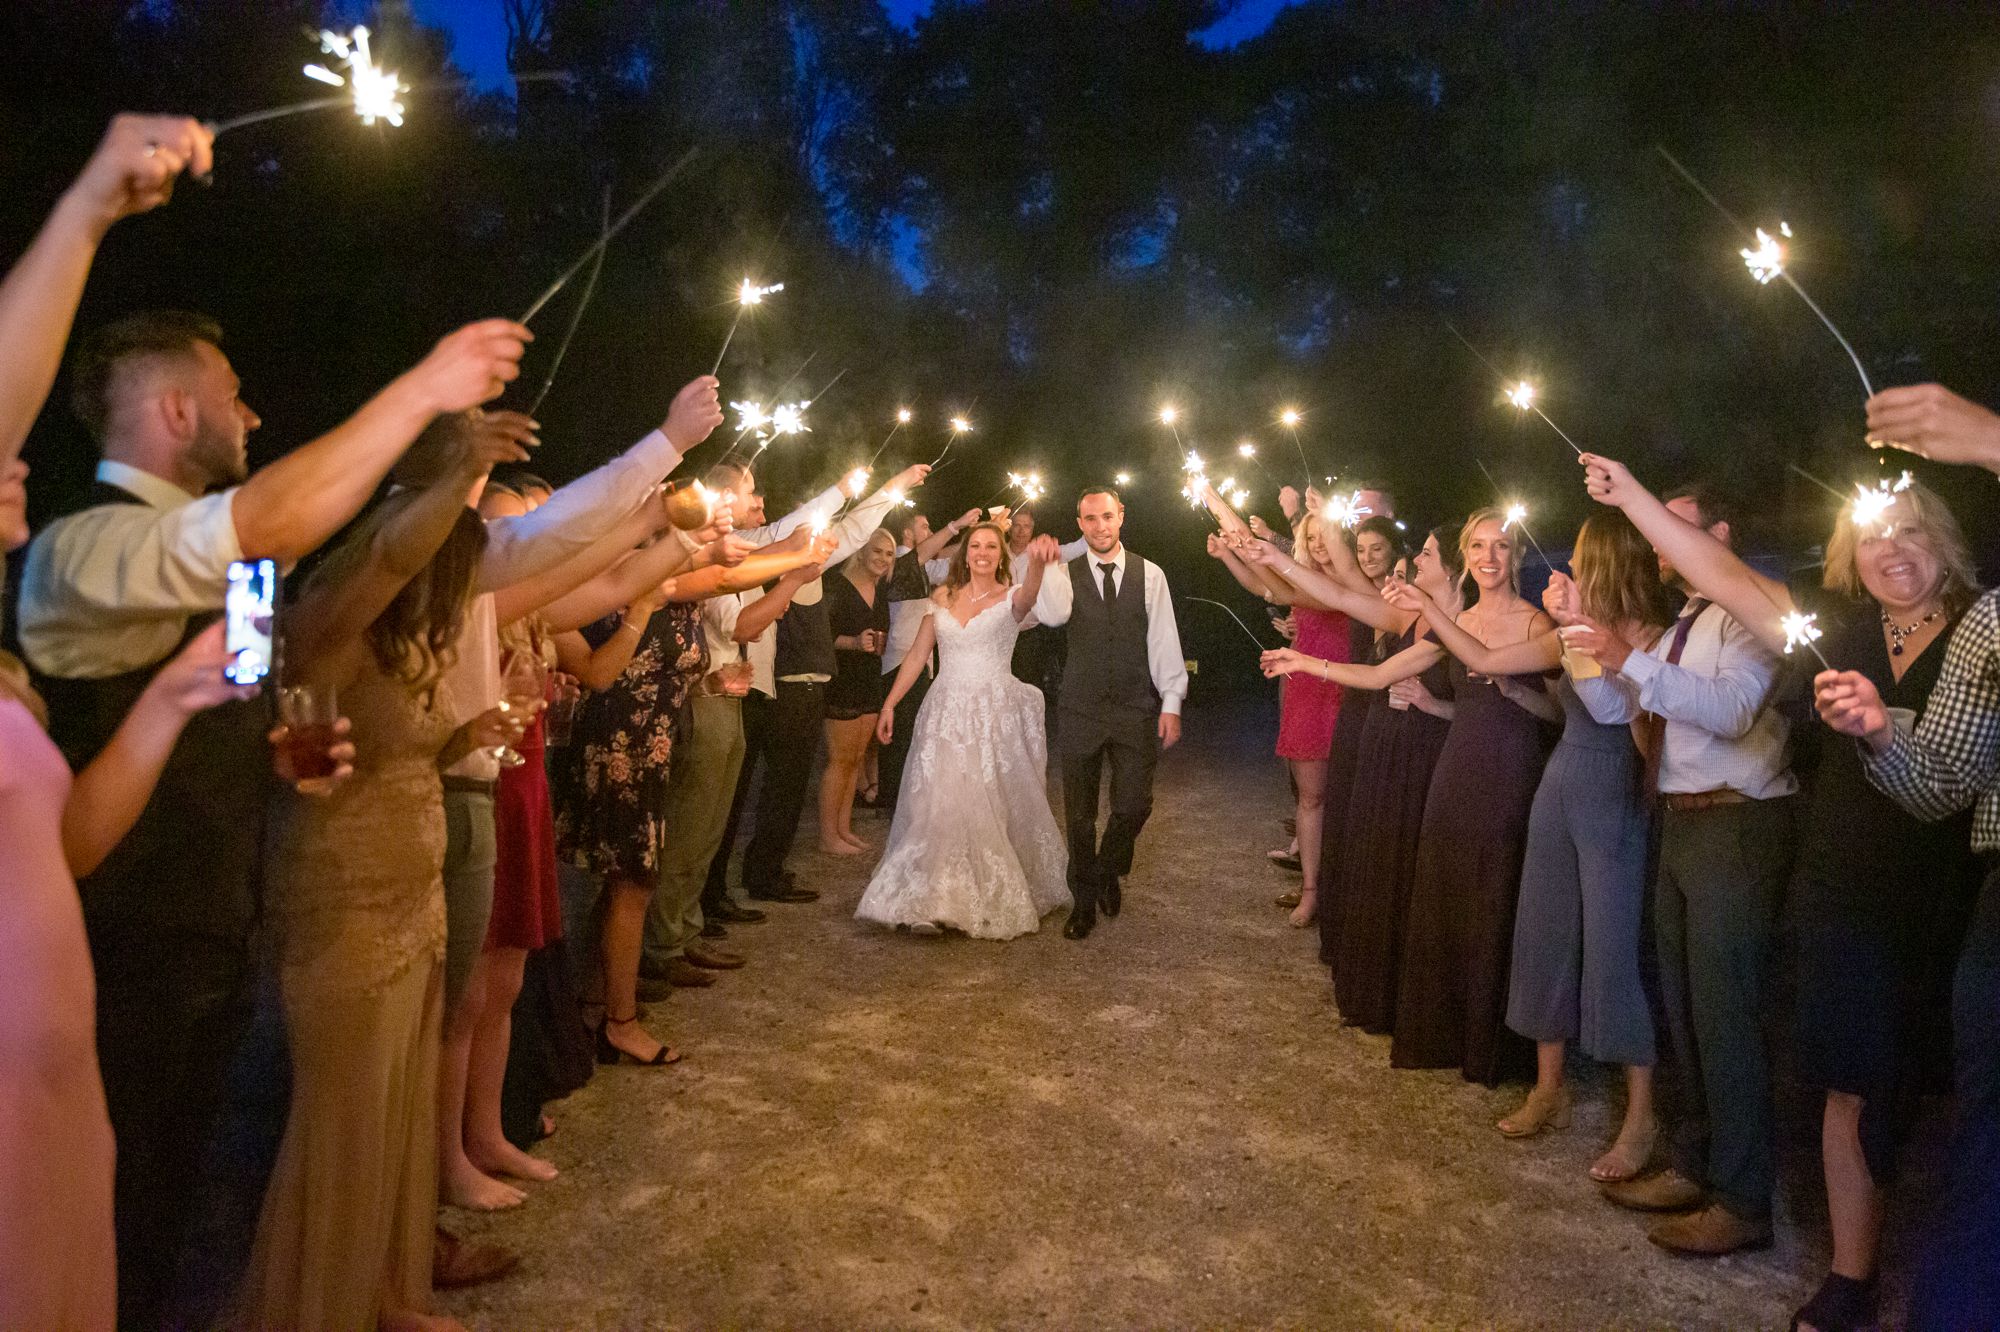 Bride and groom walk during their sparklers send-off ceremony